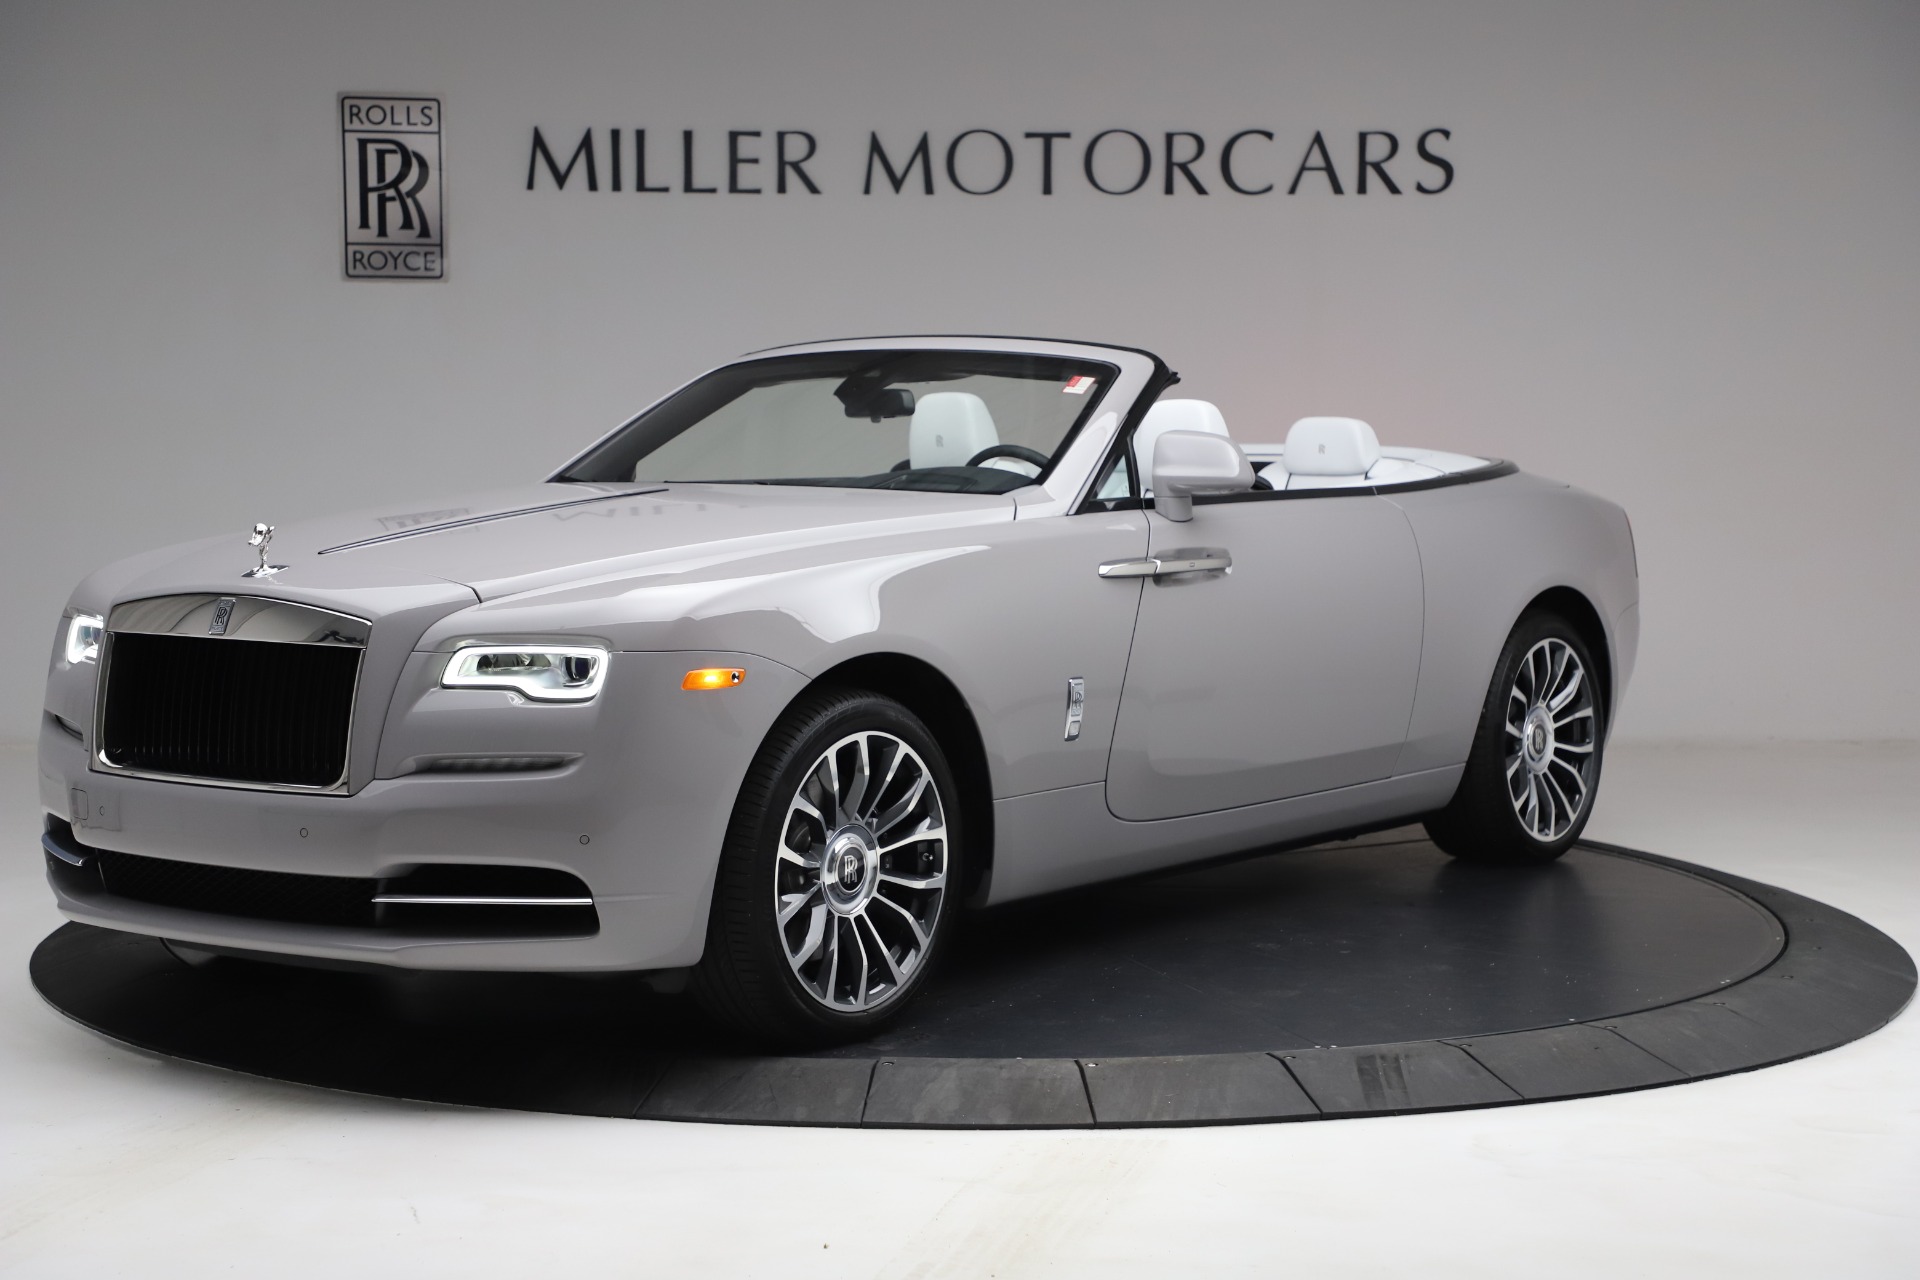 2021 RollsRoyce Ghost Is as Peaceful as You Want It to Be